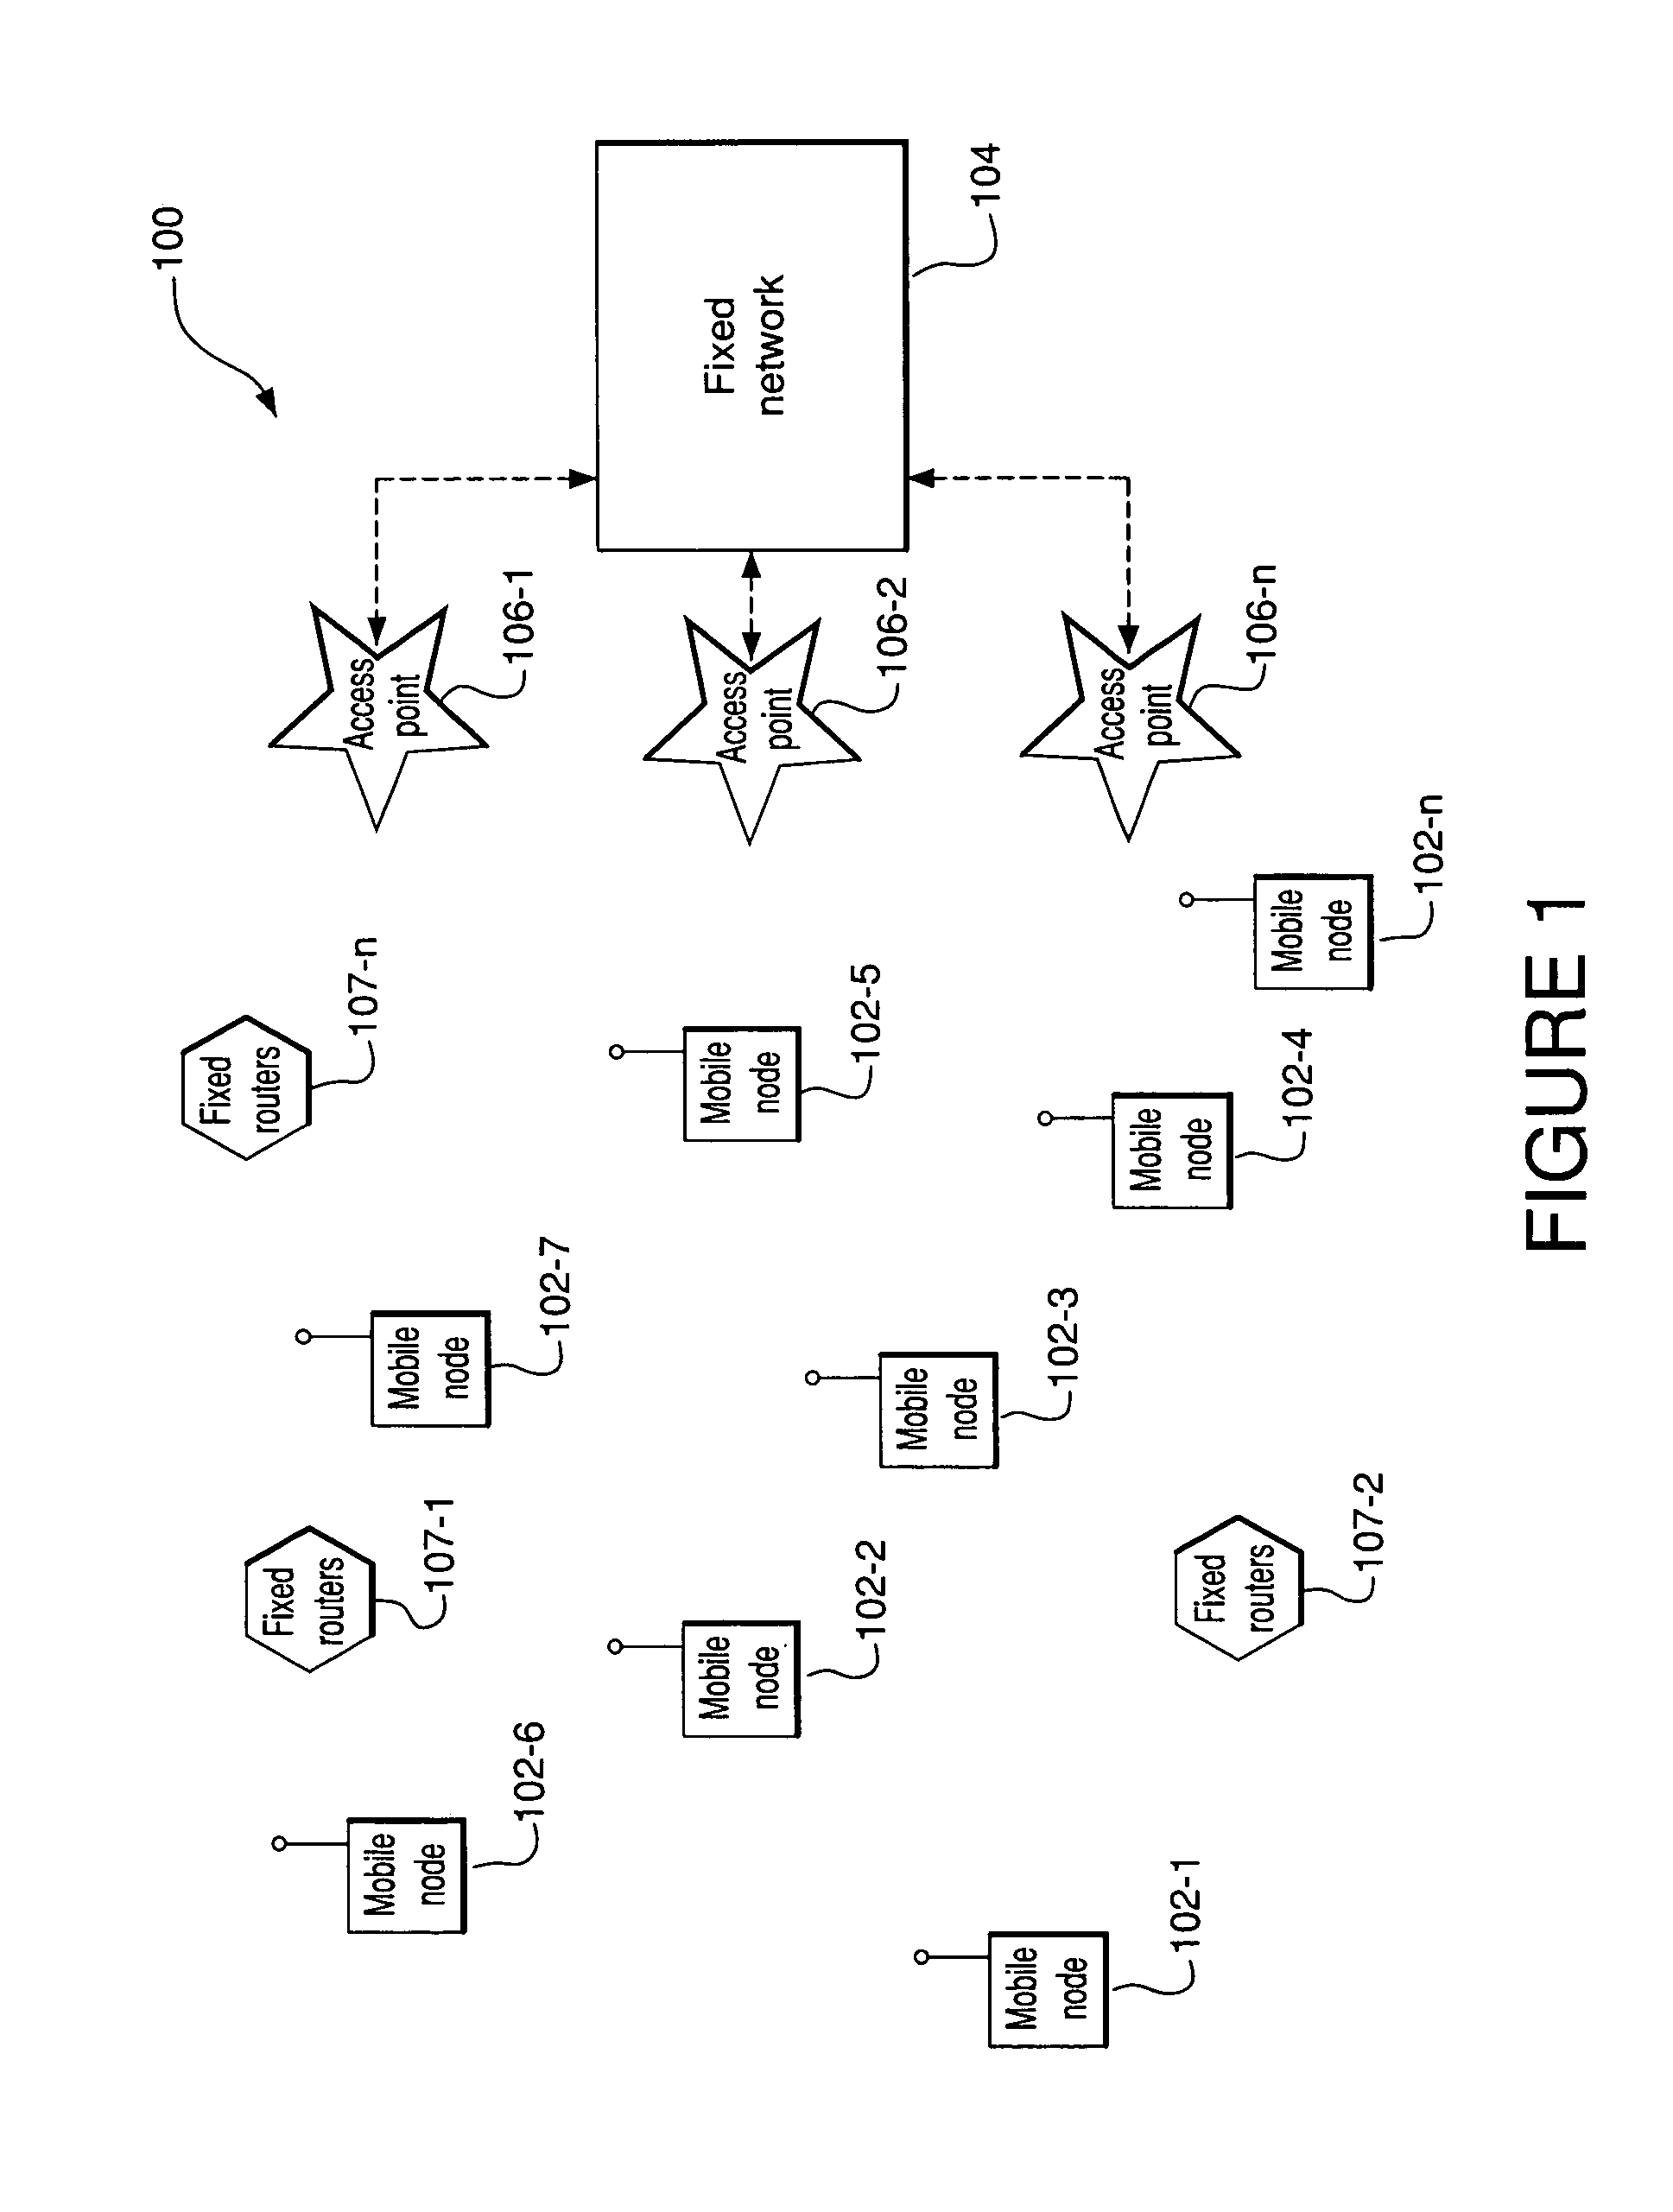 System and method for correcting the clock drift and maintaining the synchronization of low quality clocks in wireless networks